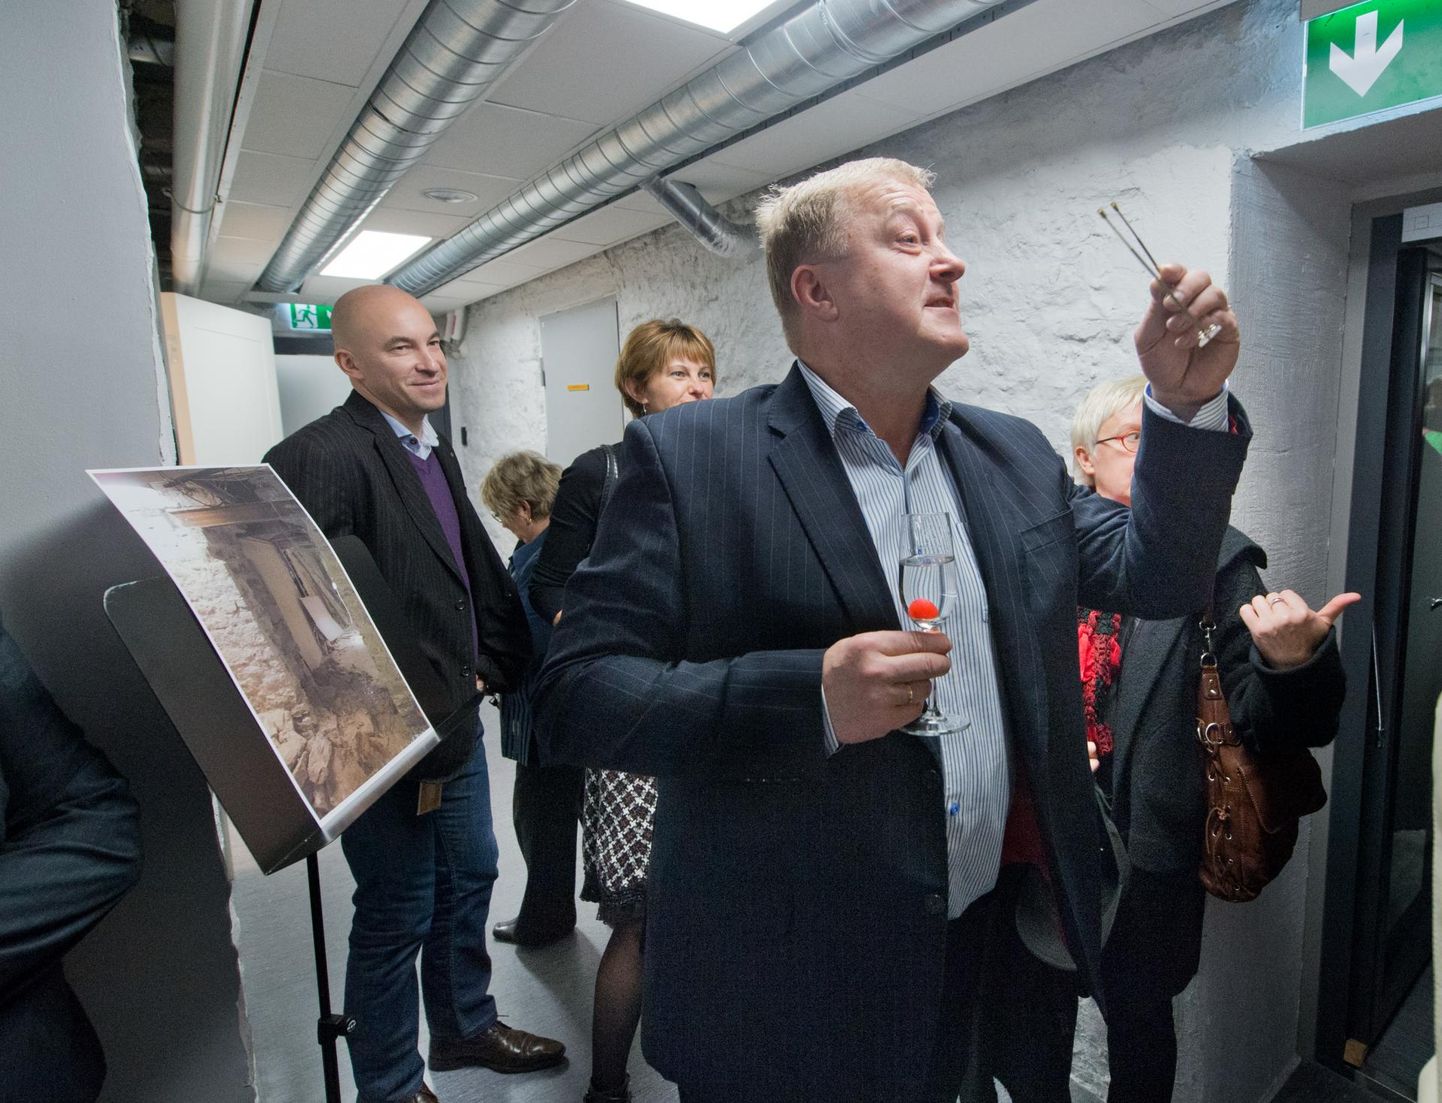 Aivar Mäe at the opening of ERSO's new premises in the basement of the Estonia Opera Theater.